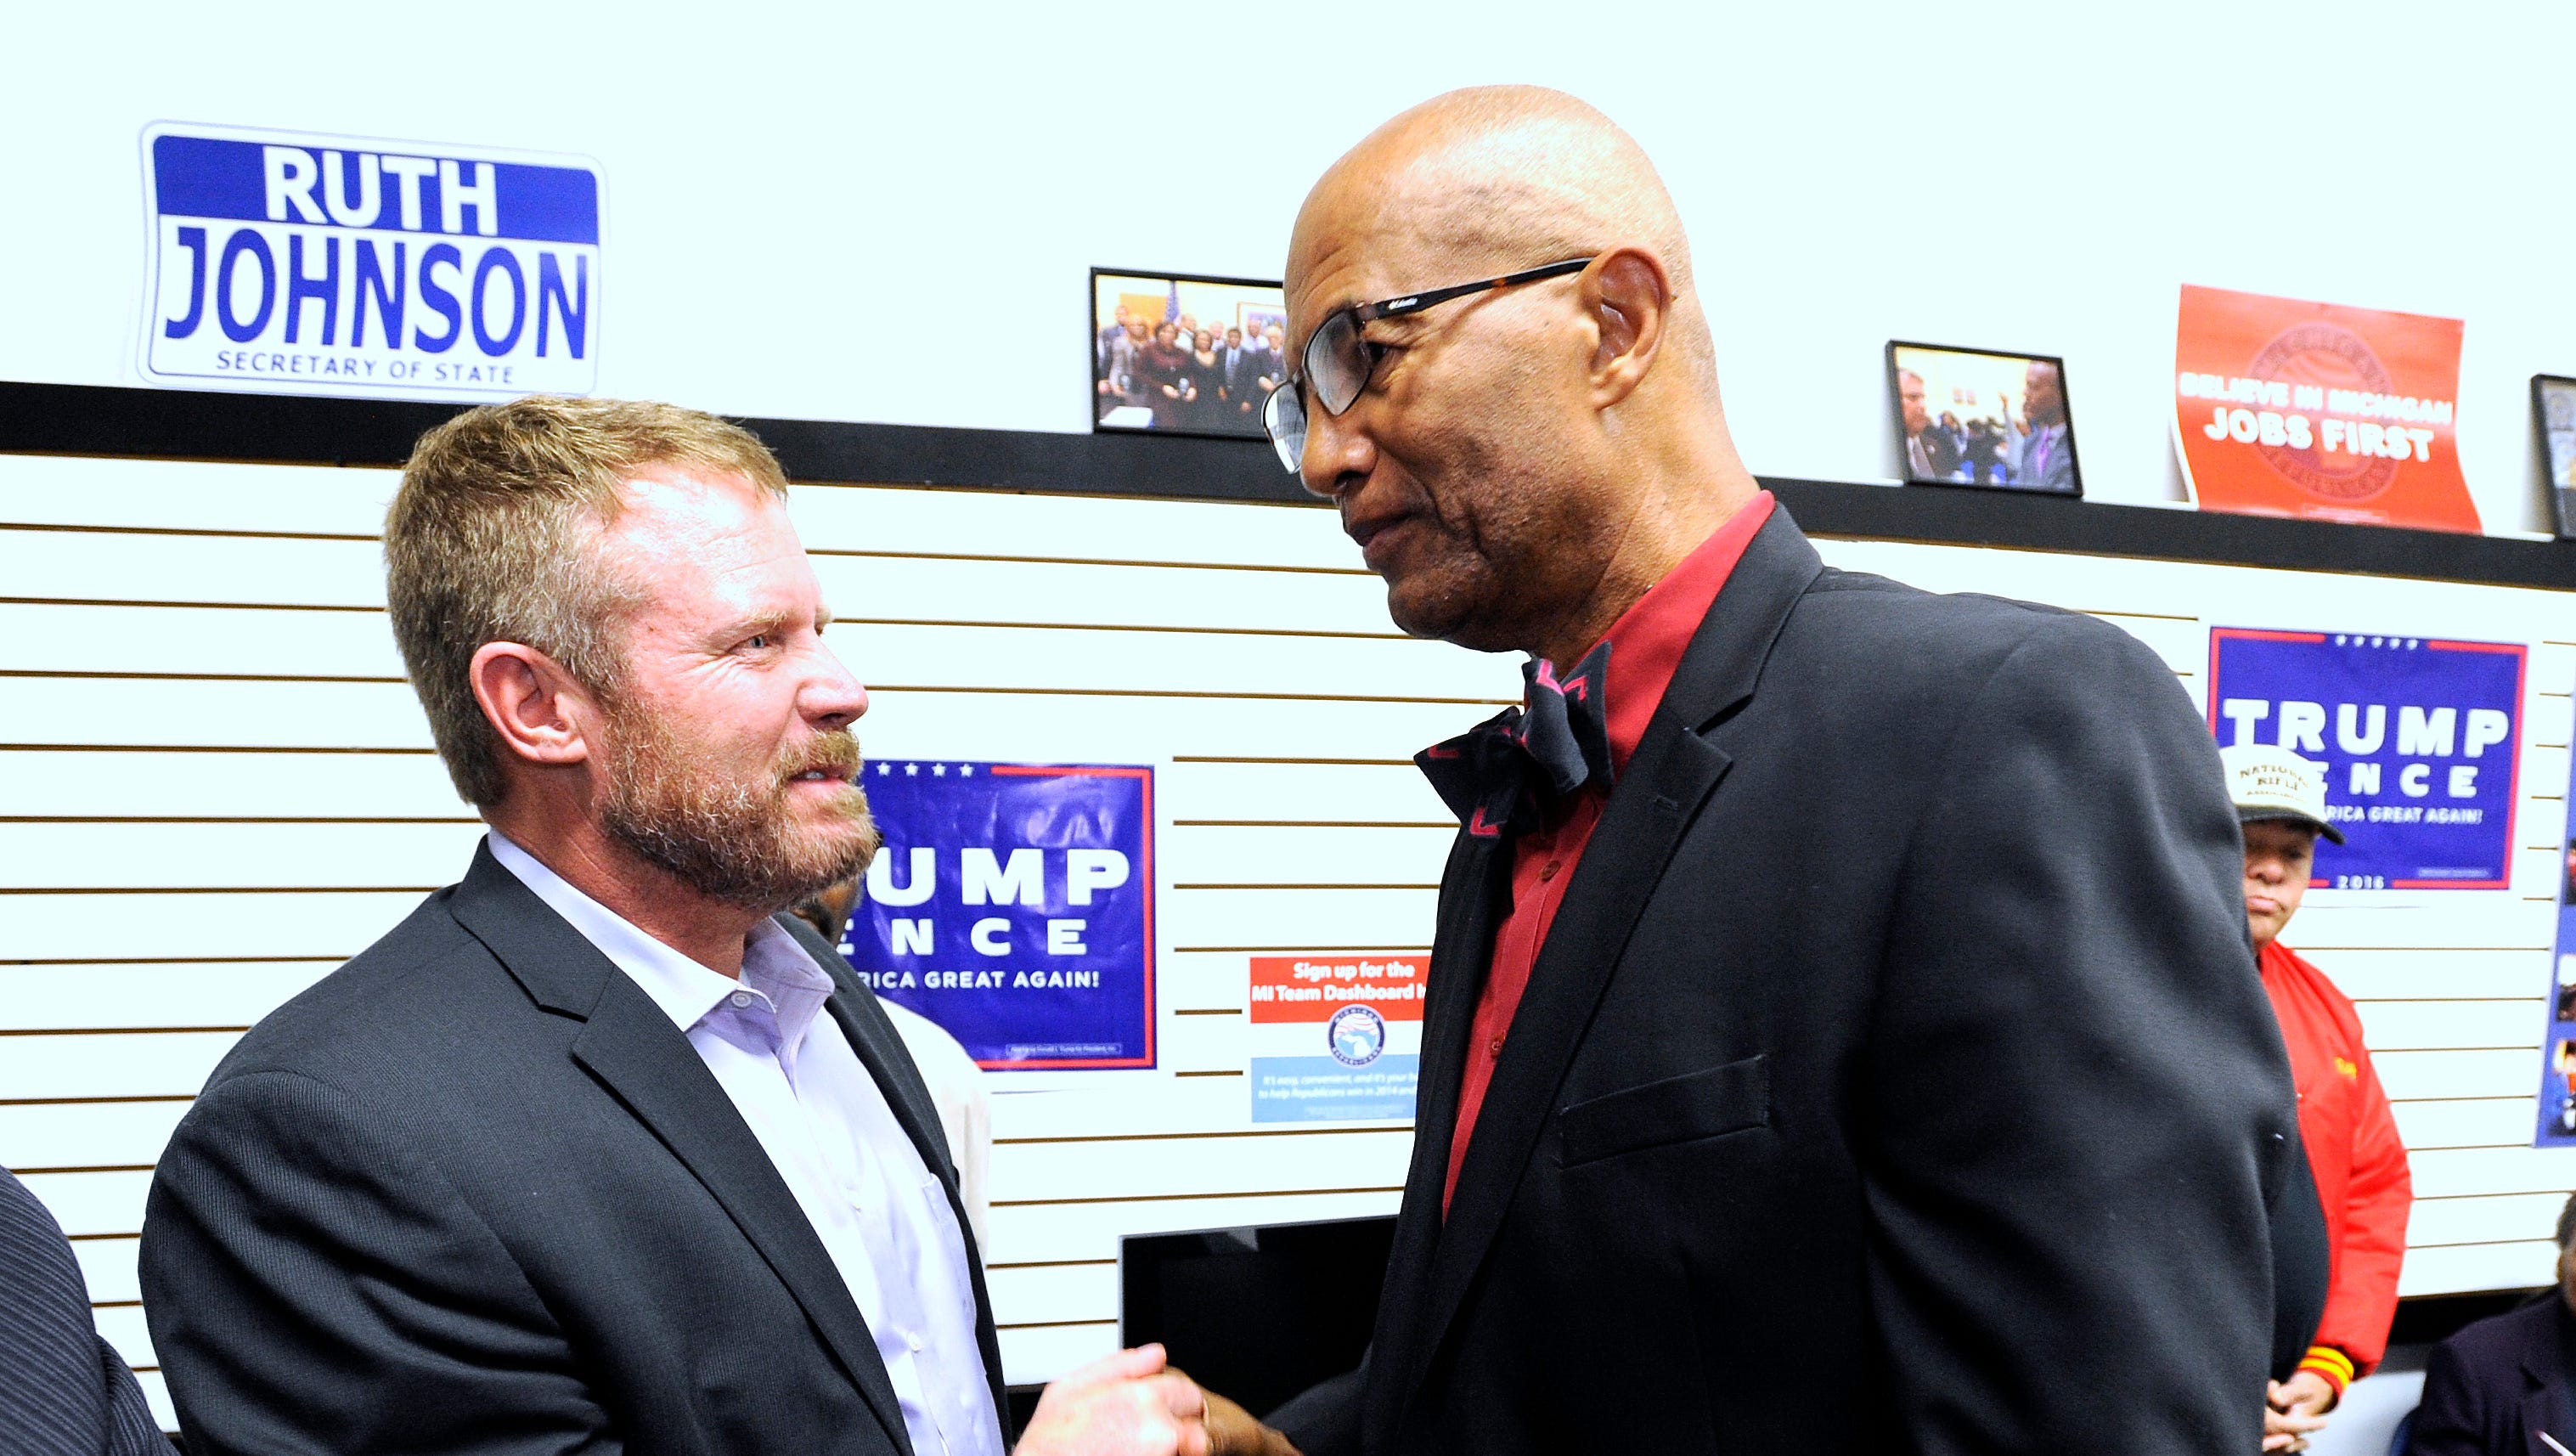 Jerome Barney, right, 67 of Southfield, shakes hands with retired U.S. Marine Mark "Oz" Geist, left, of Colorado, during the event. Barney is a lawyer and board member of the Michigan Black Chamber of Commerce as Geist served in the U.S. Marines for 12 years as an interrogator and translator speaking Farsi as a second language.